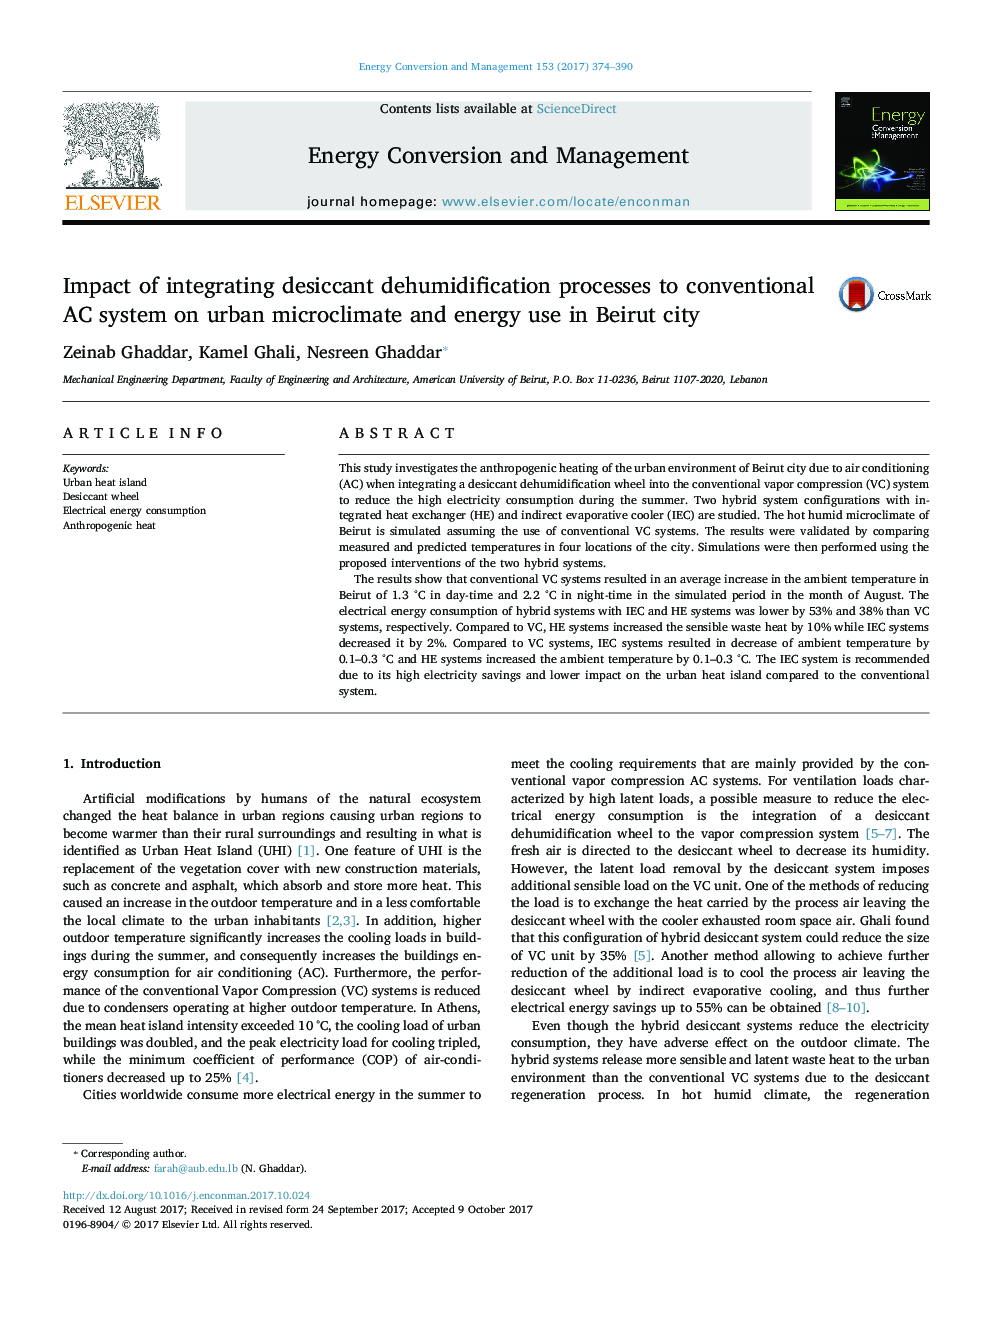 Impact of integrating desiccant dehumidification processes to conventional AC system on urban microclimate and energy use in Beirut city